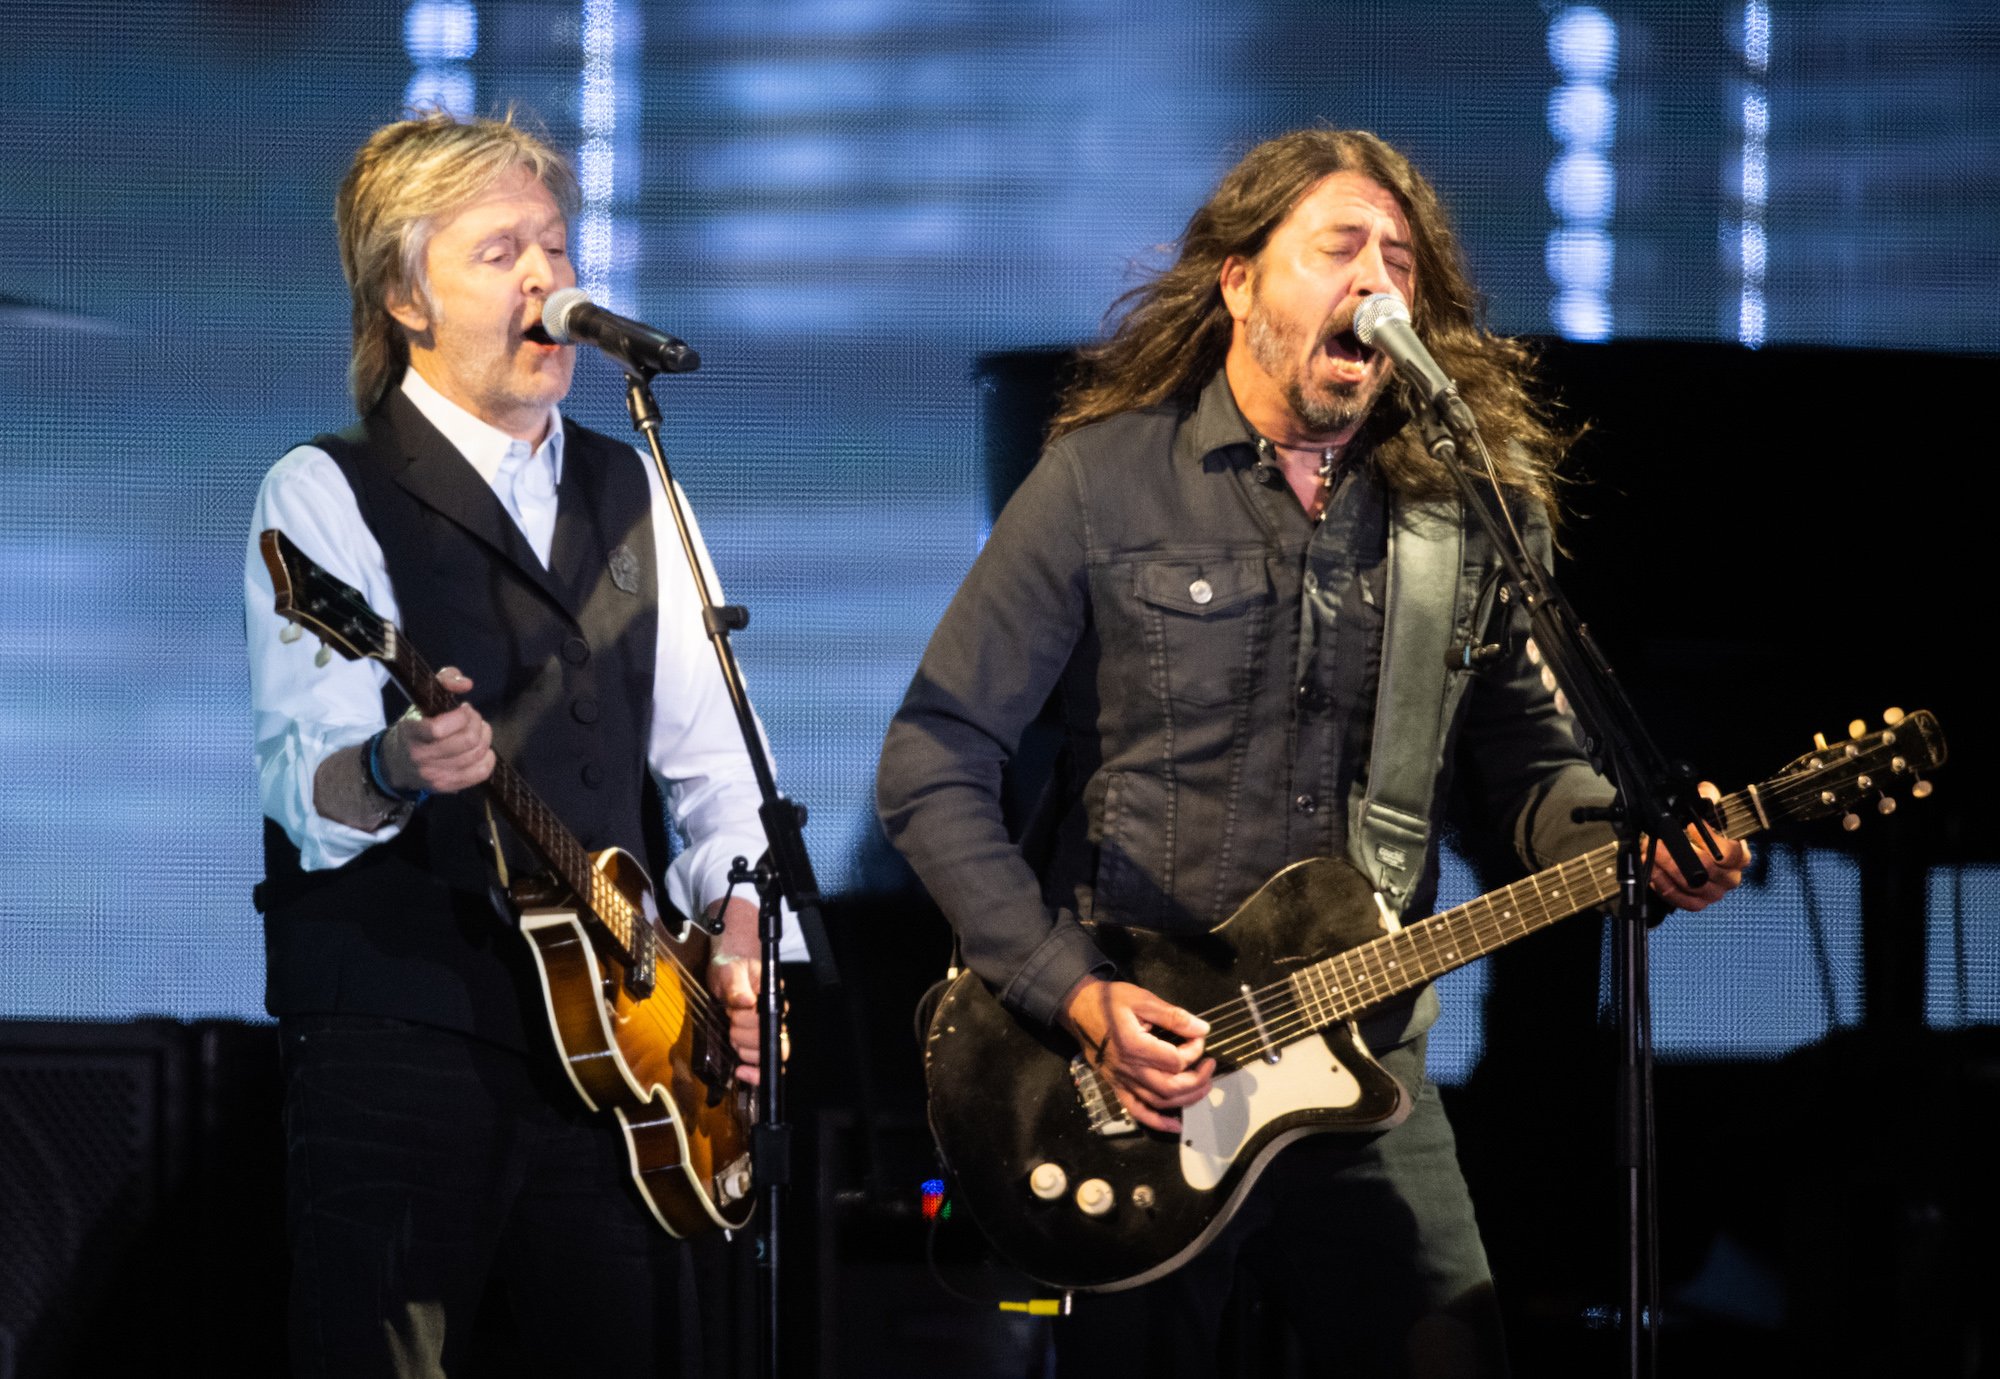 Paul McCartney performs with former Nirvana member Dave Grohl during day four of Glastonbury Festival